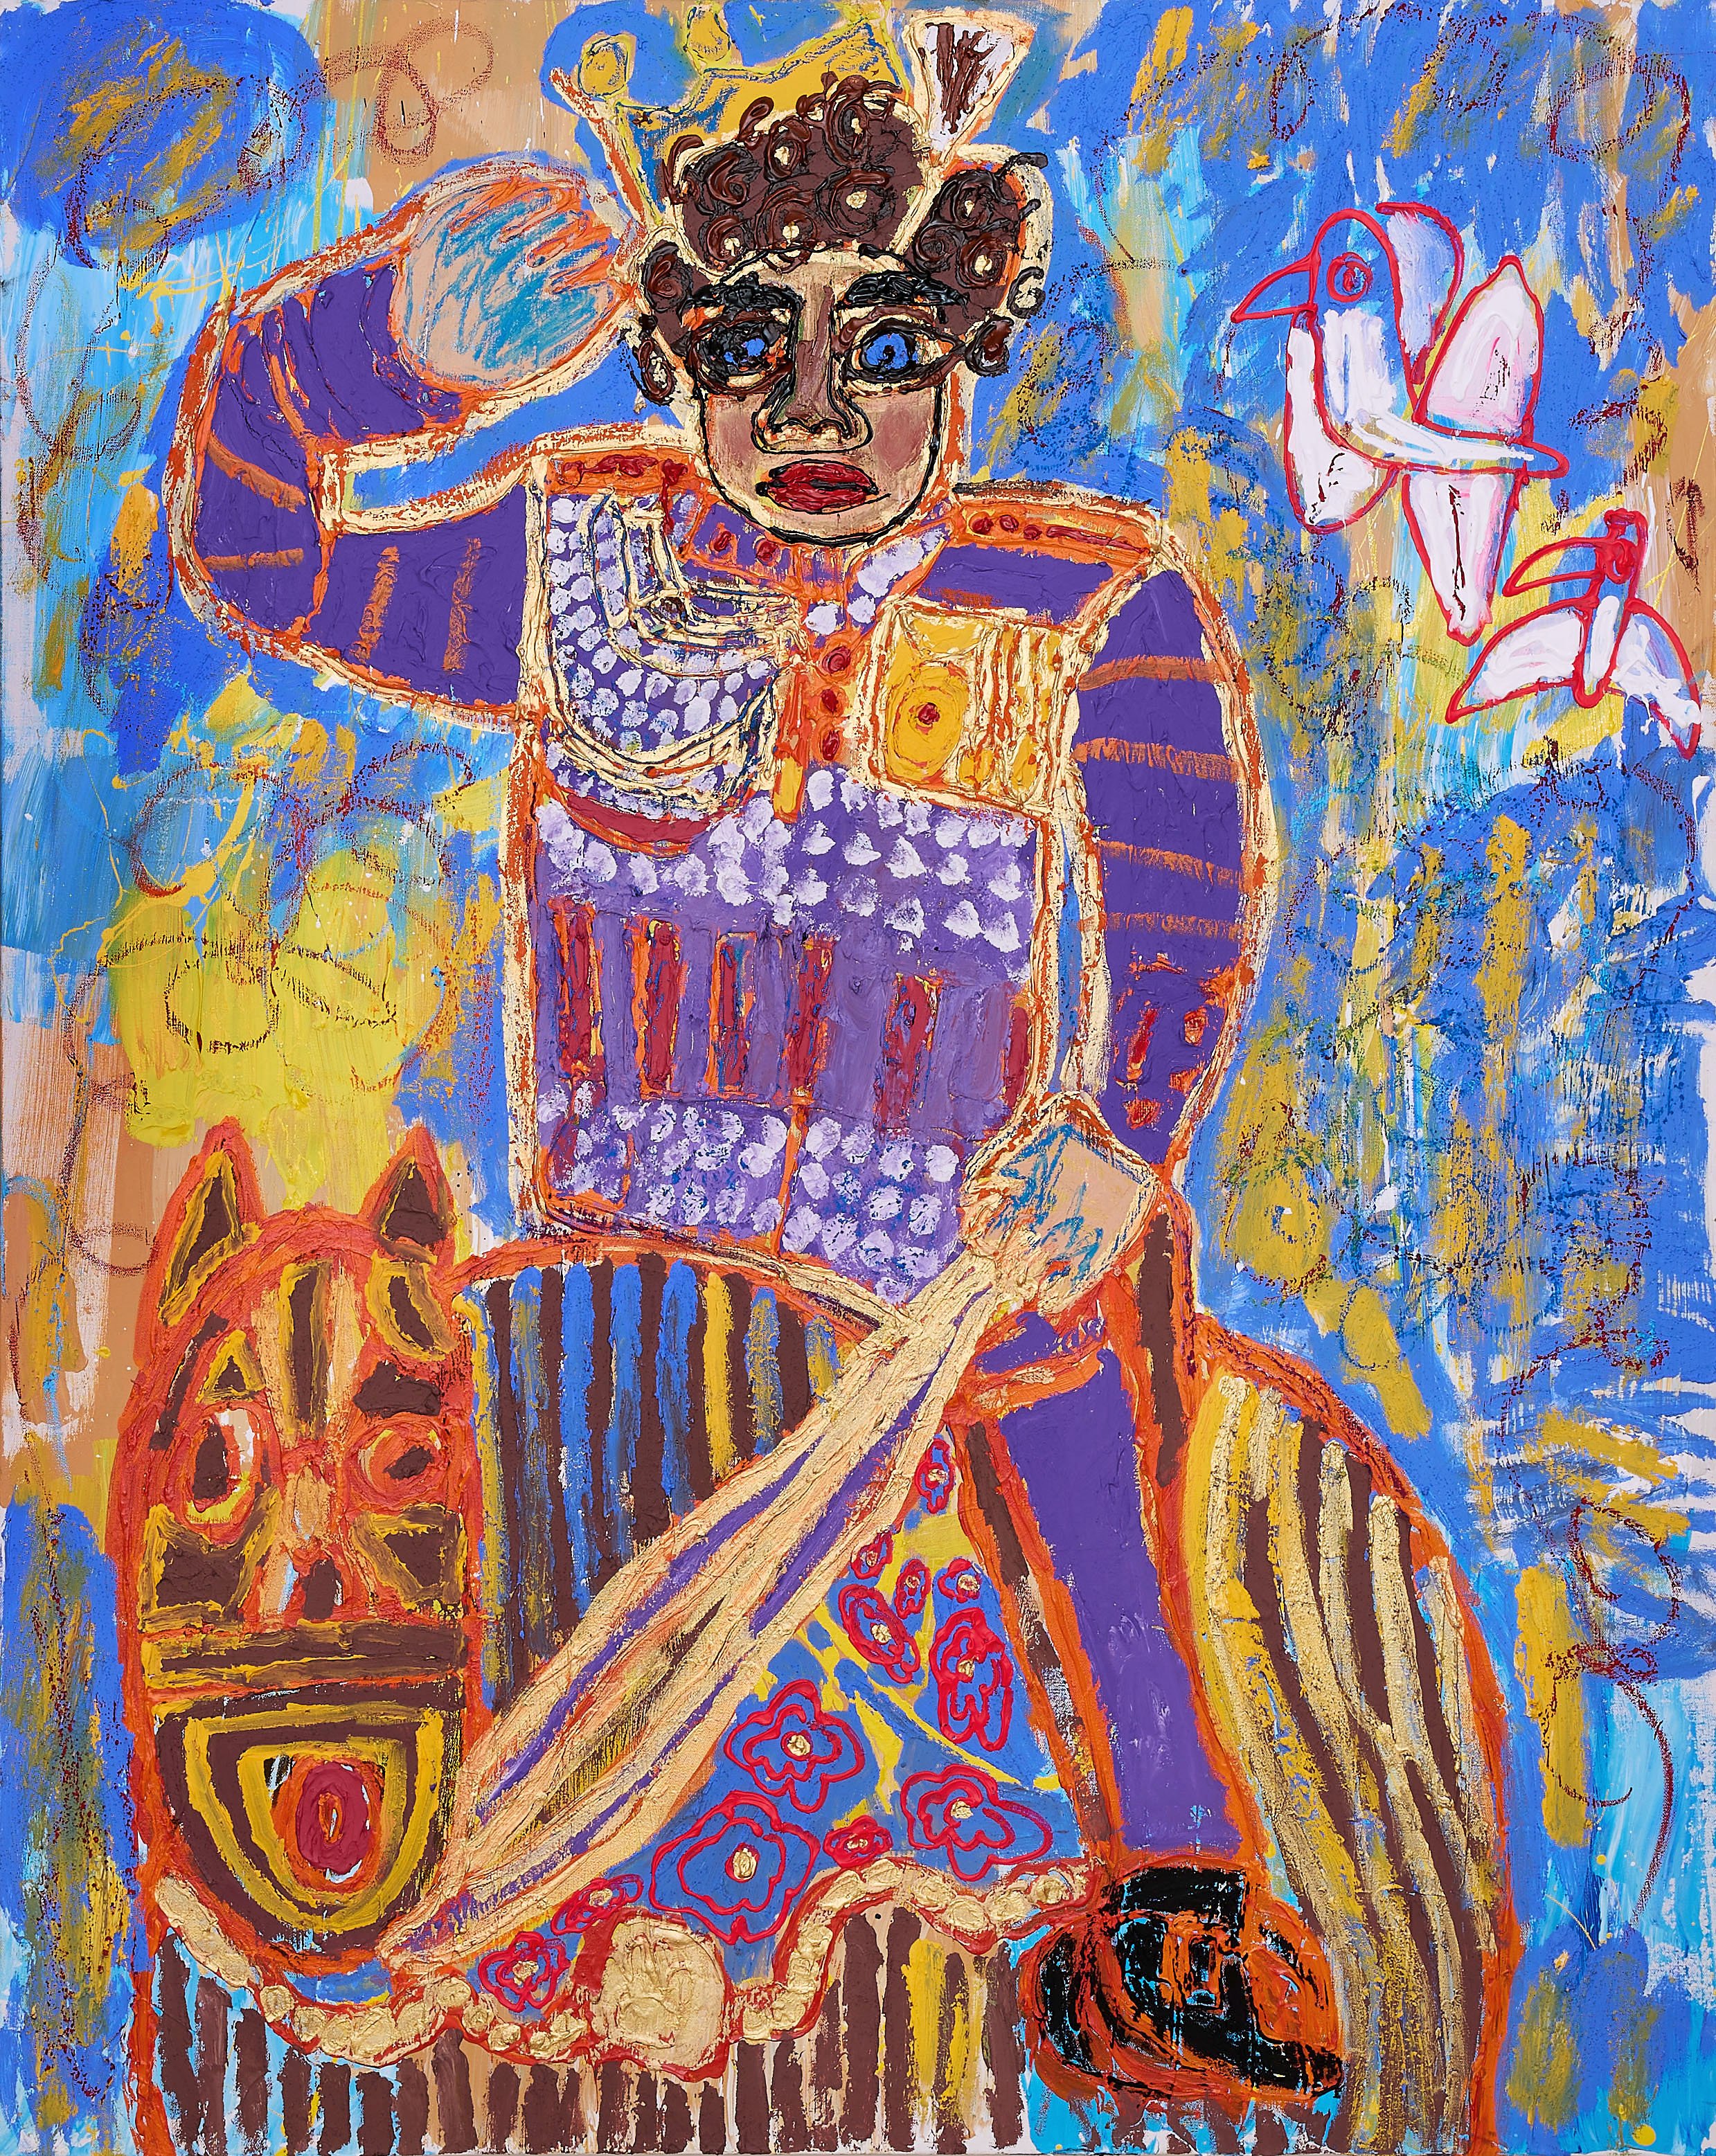 Queen on thre horse 122x153cm mixed media on the canvas.jpg